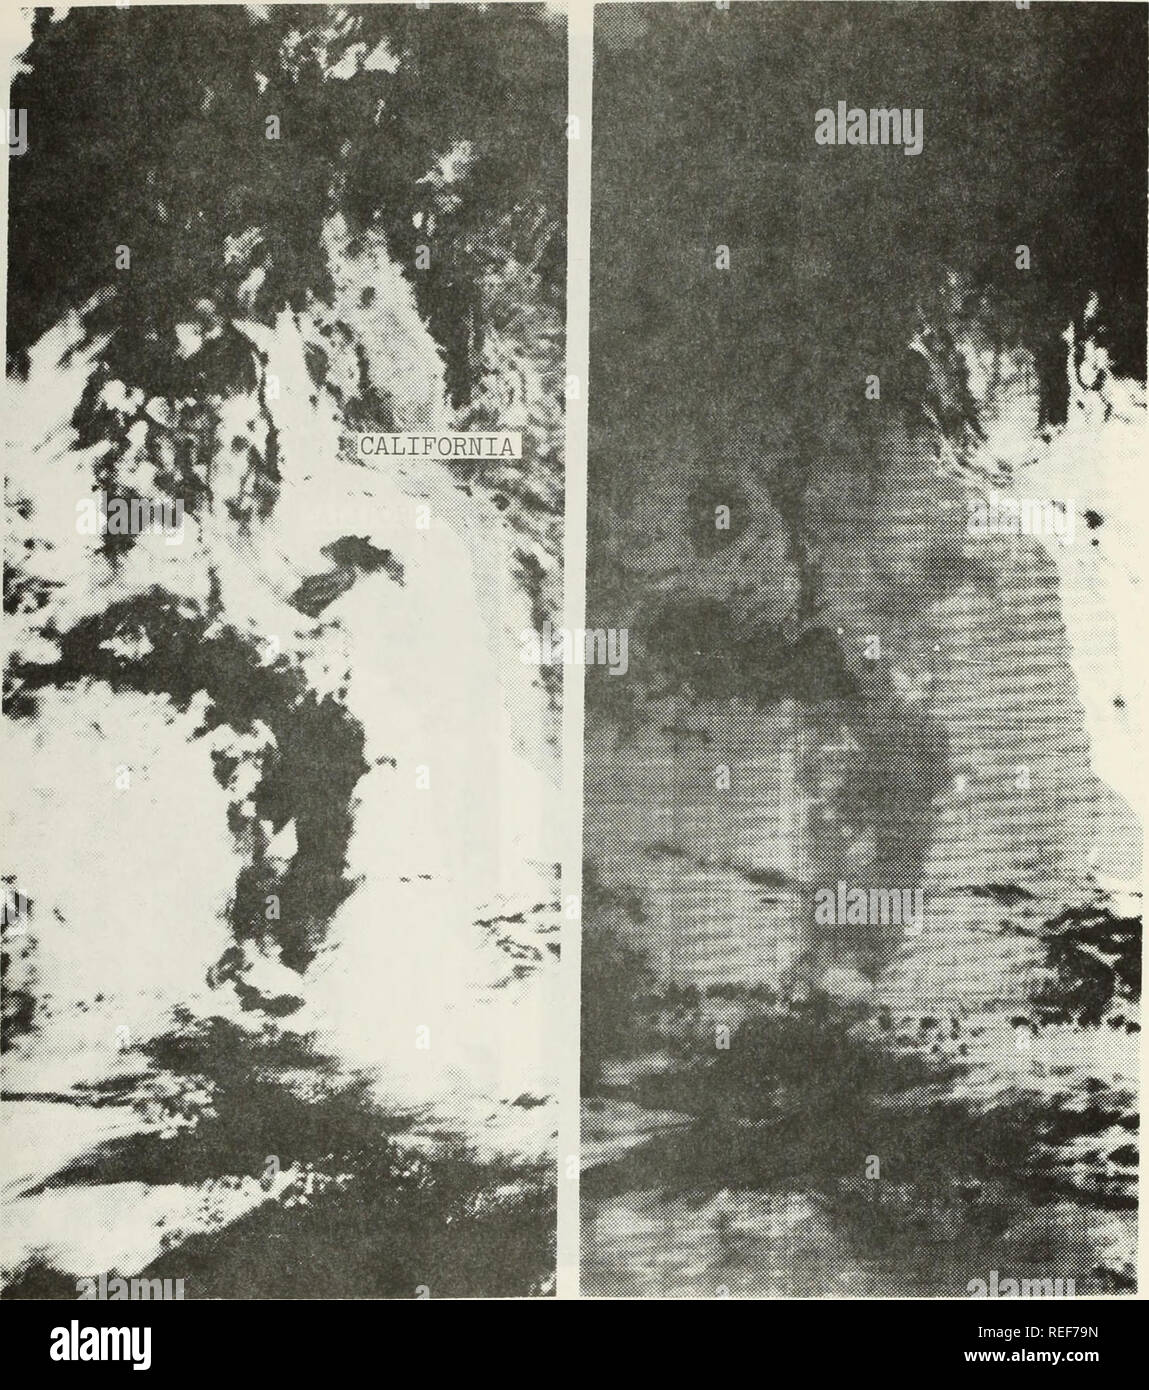 . A comparison of satellite images capable of detecting ocean surface features.. Oceanography. (a) (b) Figure 3. DMSP Standard Archived Products, 15 March 1973. (a) Portion of a high resolution visual image of the California coast. (b) Portion of a high resolution infrared image of the California coast, showing the same area Both images were taken at the same time by the same sensor, the scanning radiometer (SR). Again notice the usefulness of the visual image for differentiating between the ocean and clouds. Received from the University of Wisconsin, Madison. 56. Please note that these images Stock Photo